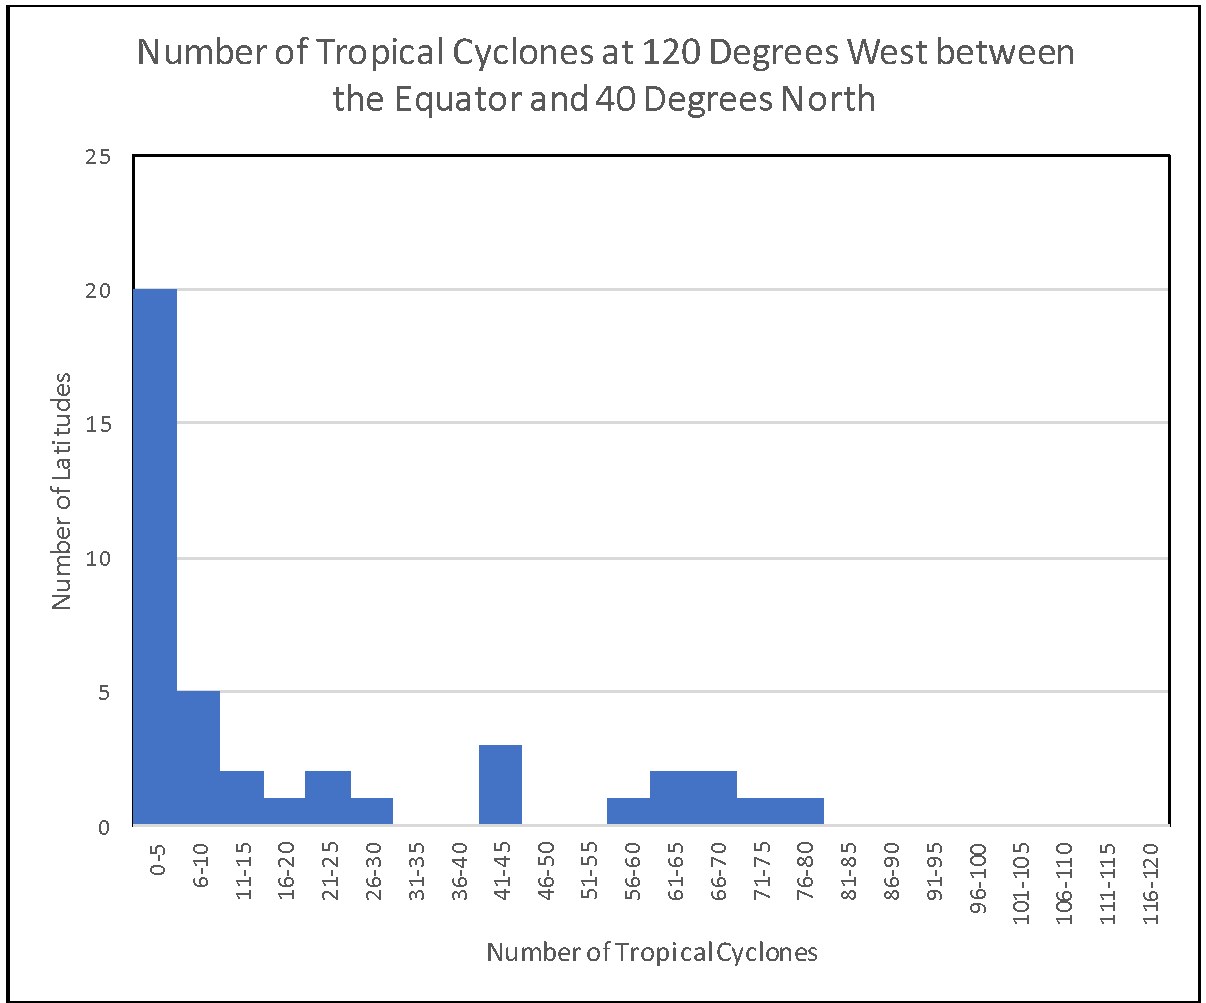 Tropical Cyclone Counts 120 Degrees West